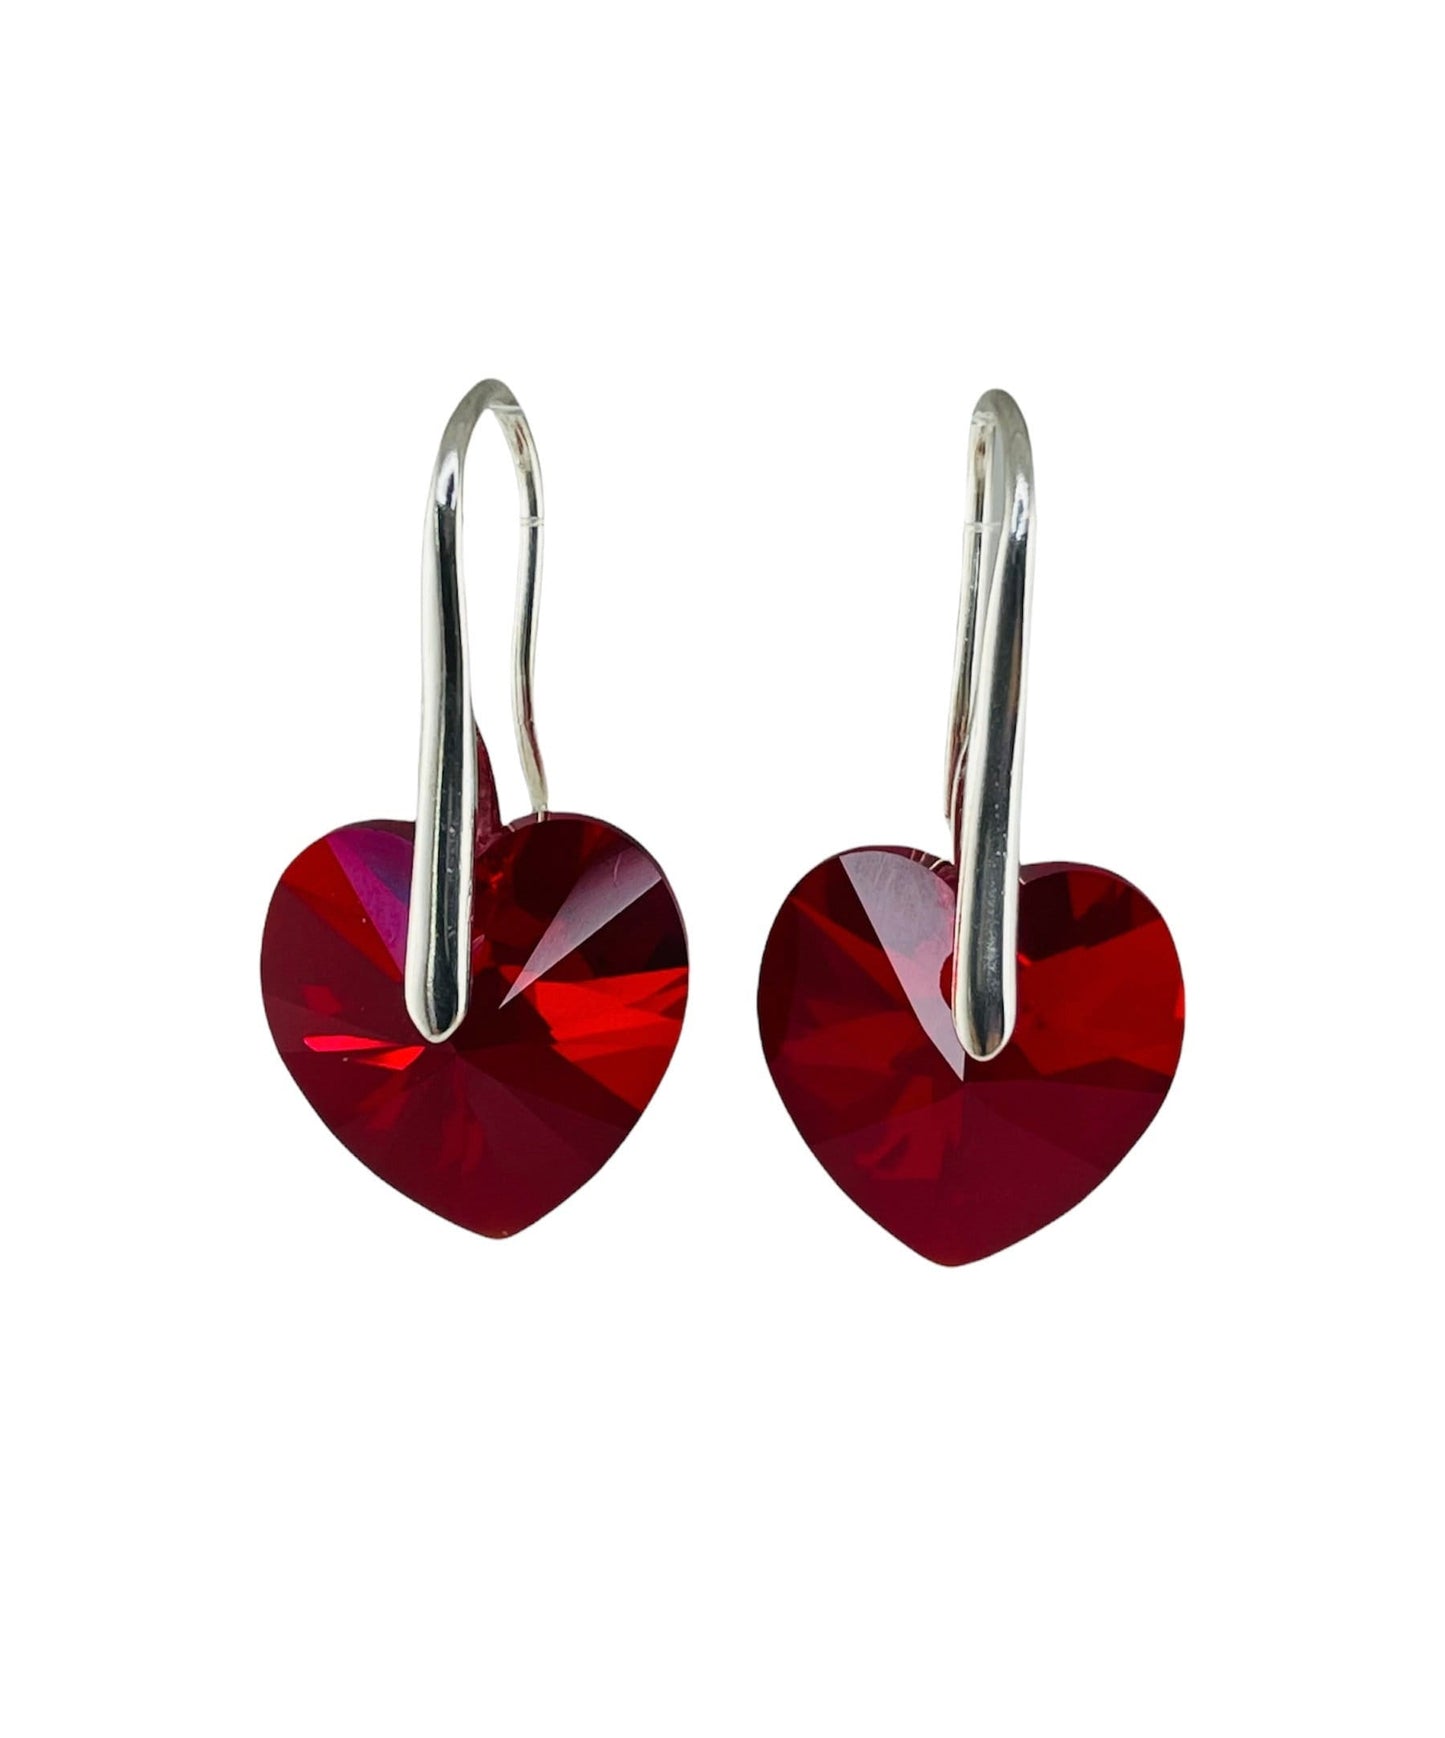 Silver Crystal Red Heart Earrings,Valentine's Day Gift,Heart Earrings,Red Heart Earrings,Siam Red Heart,15th Anniversary Gift For Wife